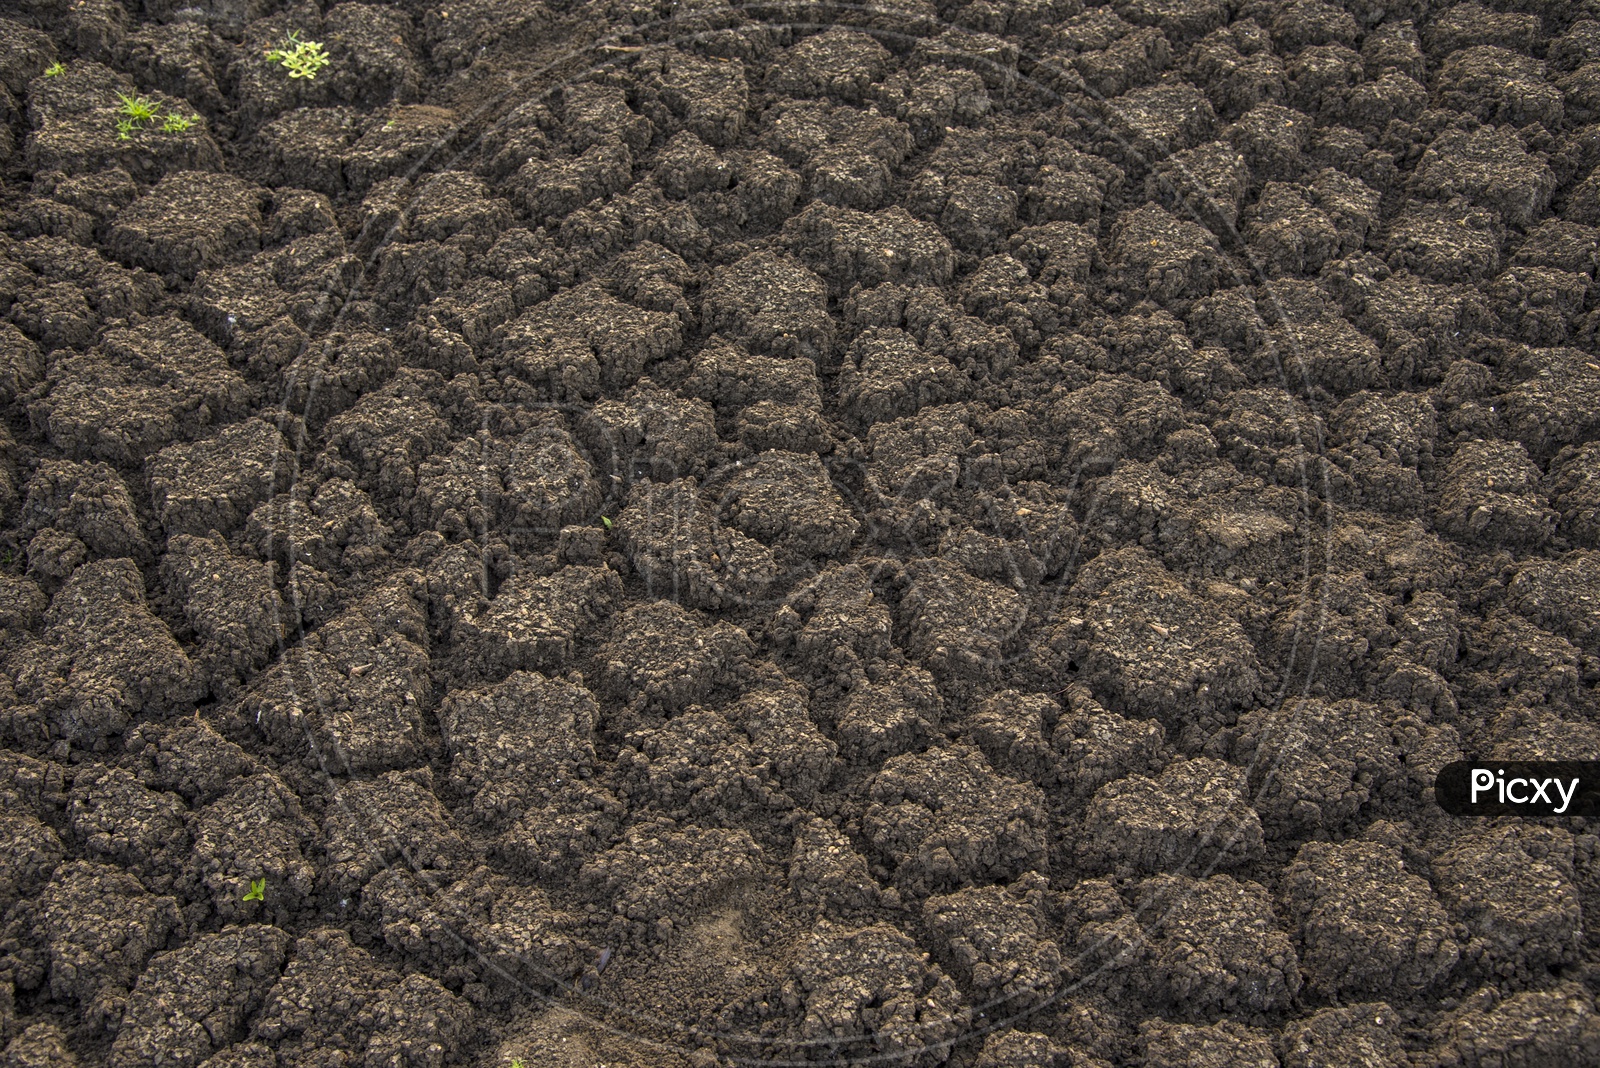 Drought Land With Dried Cracked Soil With Seamless Patterns Forming a Background